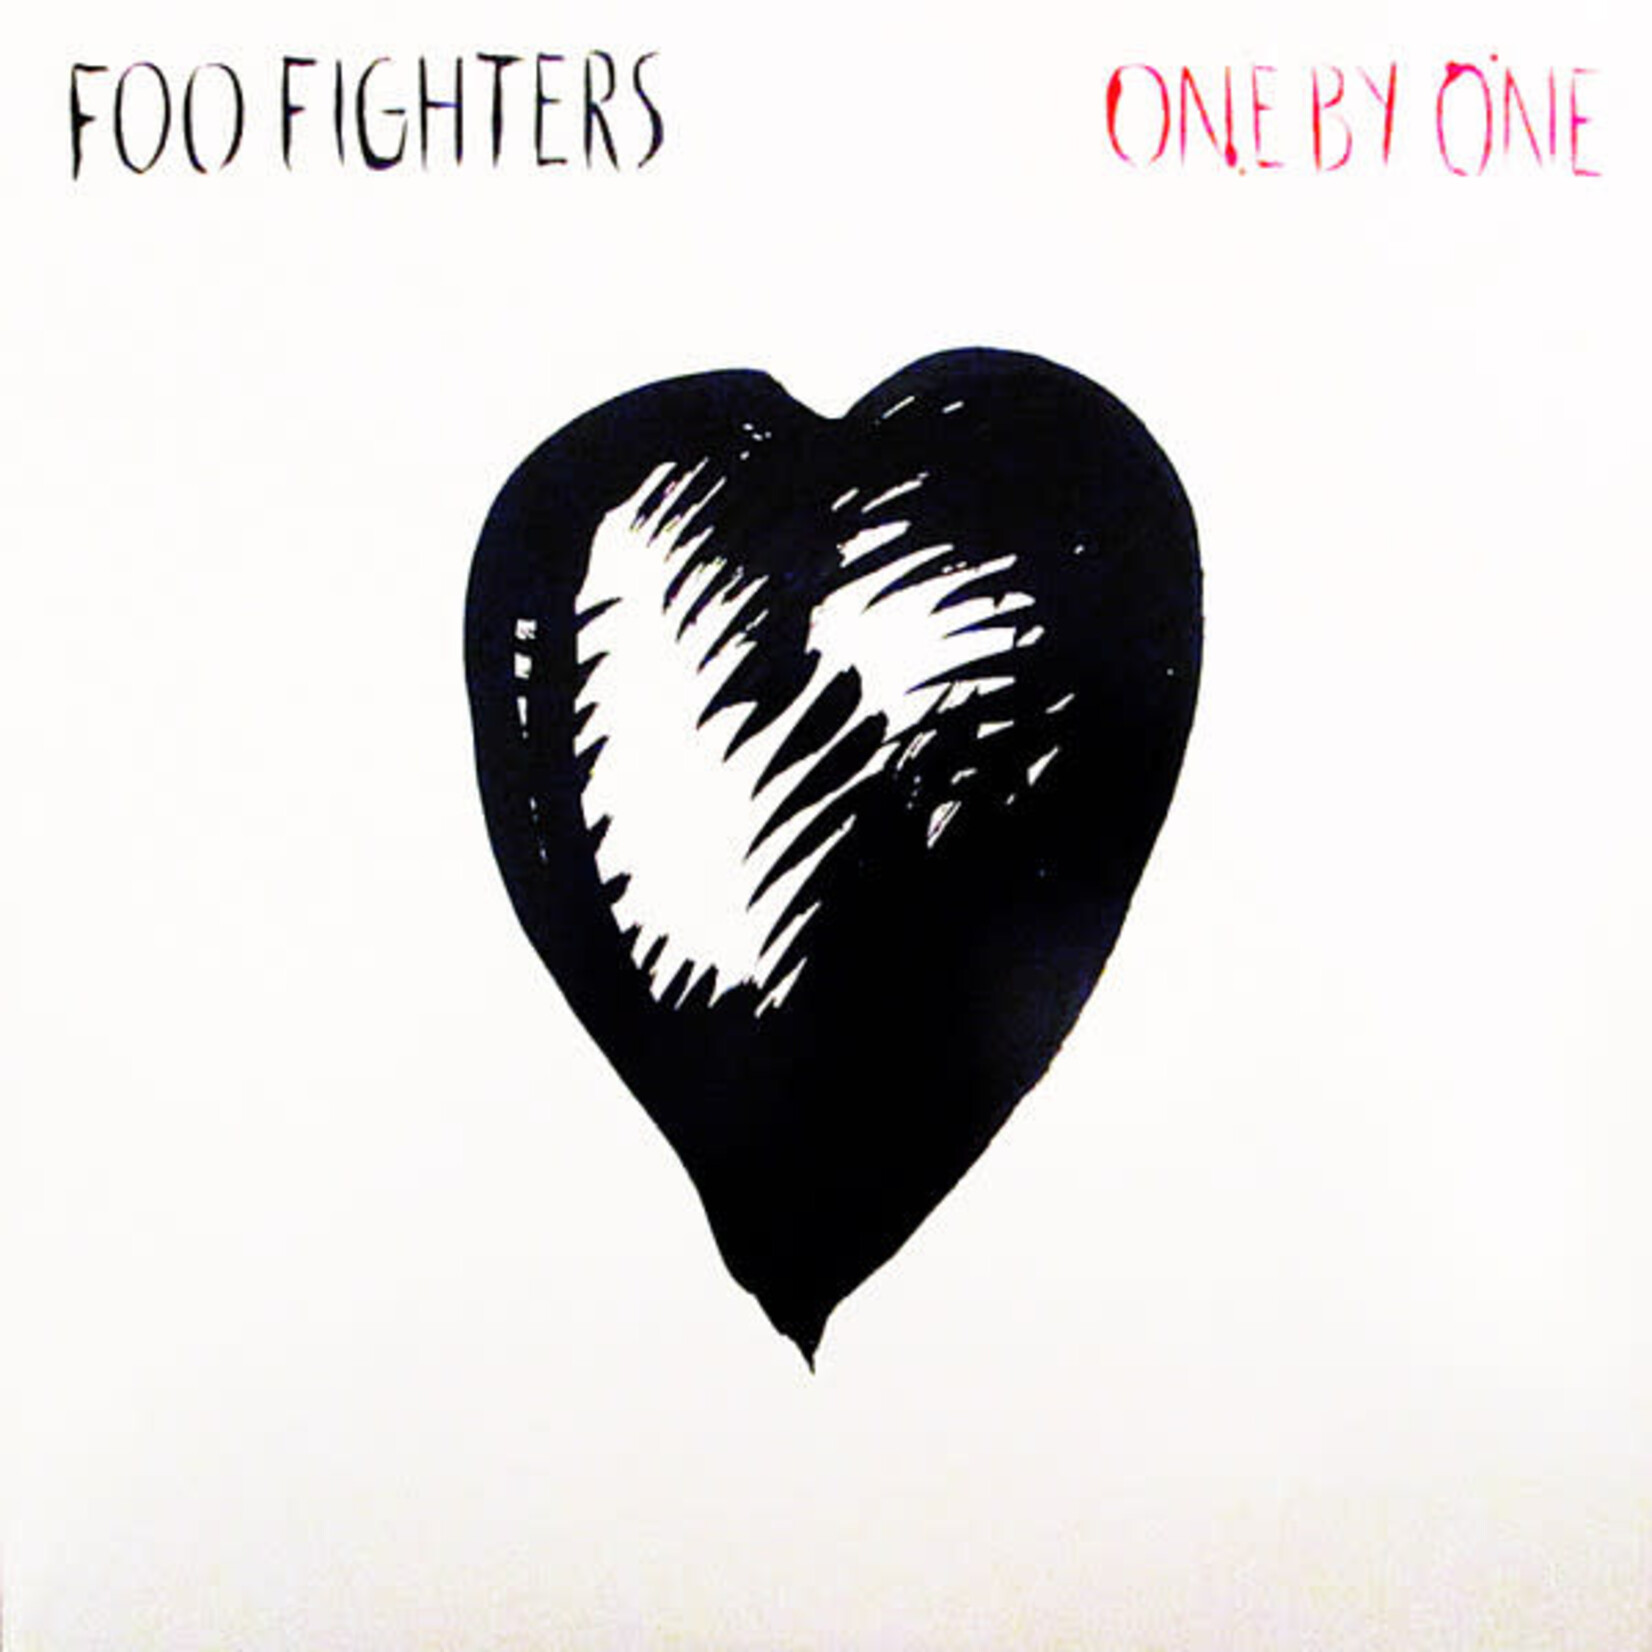 Foo Fighters Foo Fighters – One By One (New, 2LP, Roswell Records, 2015)